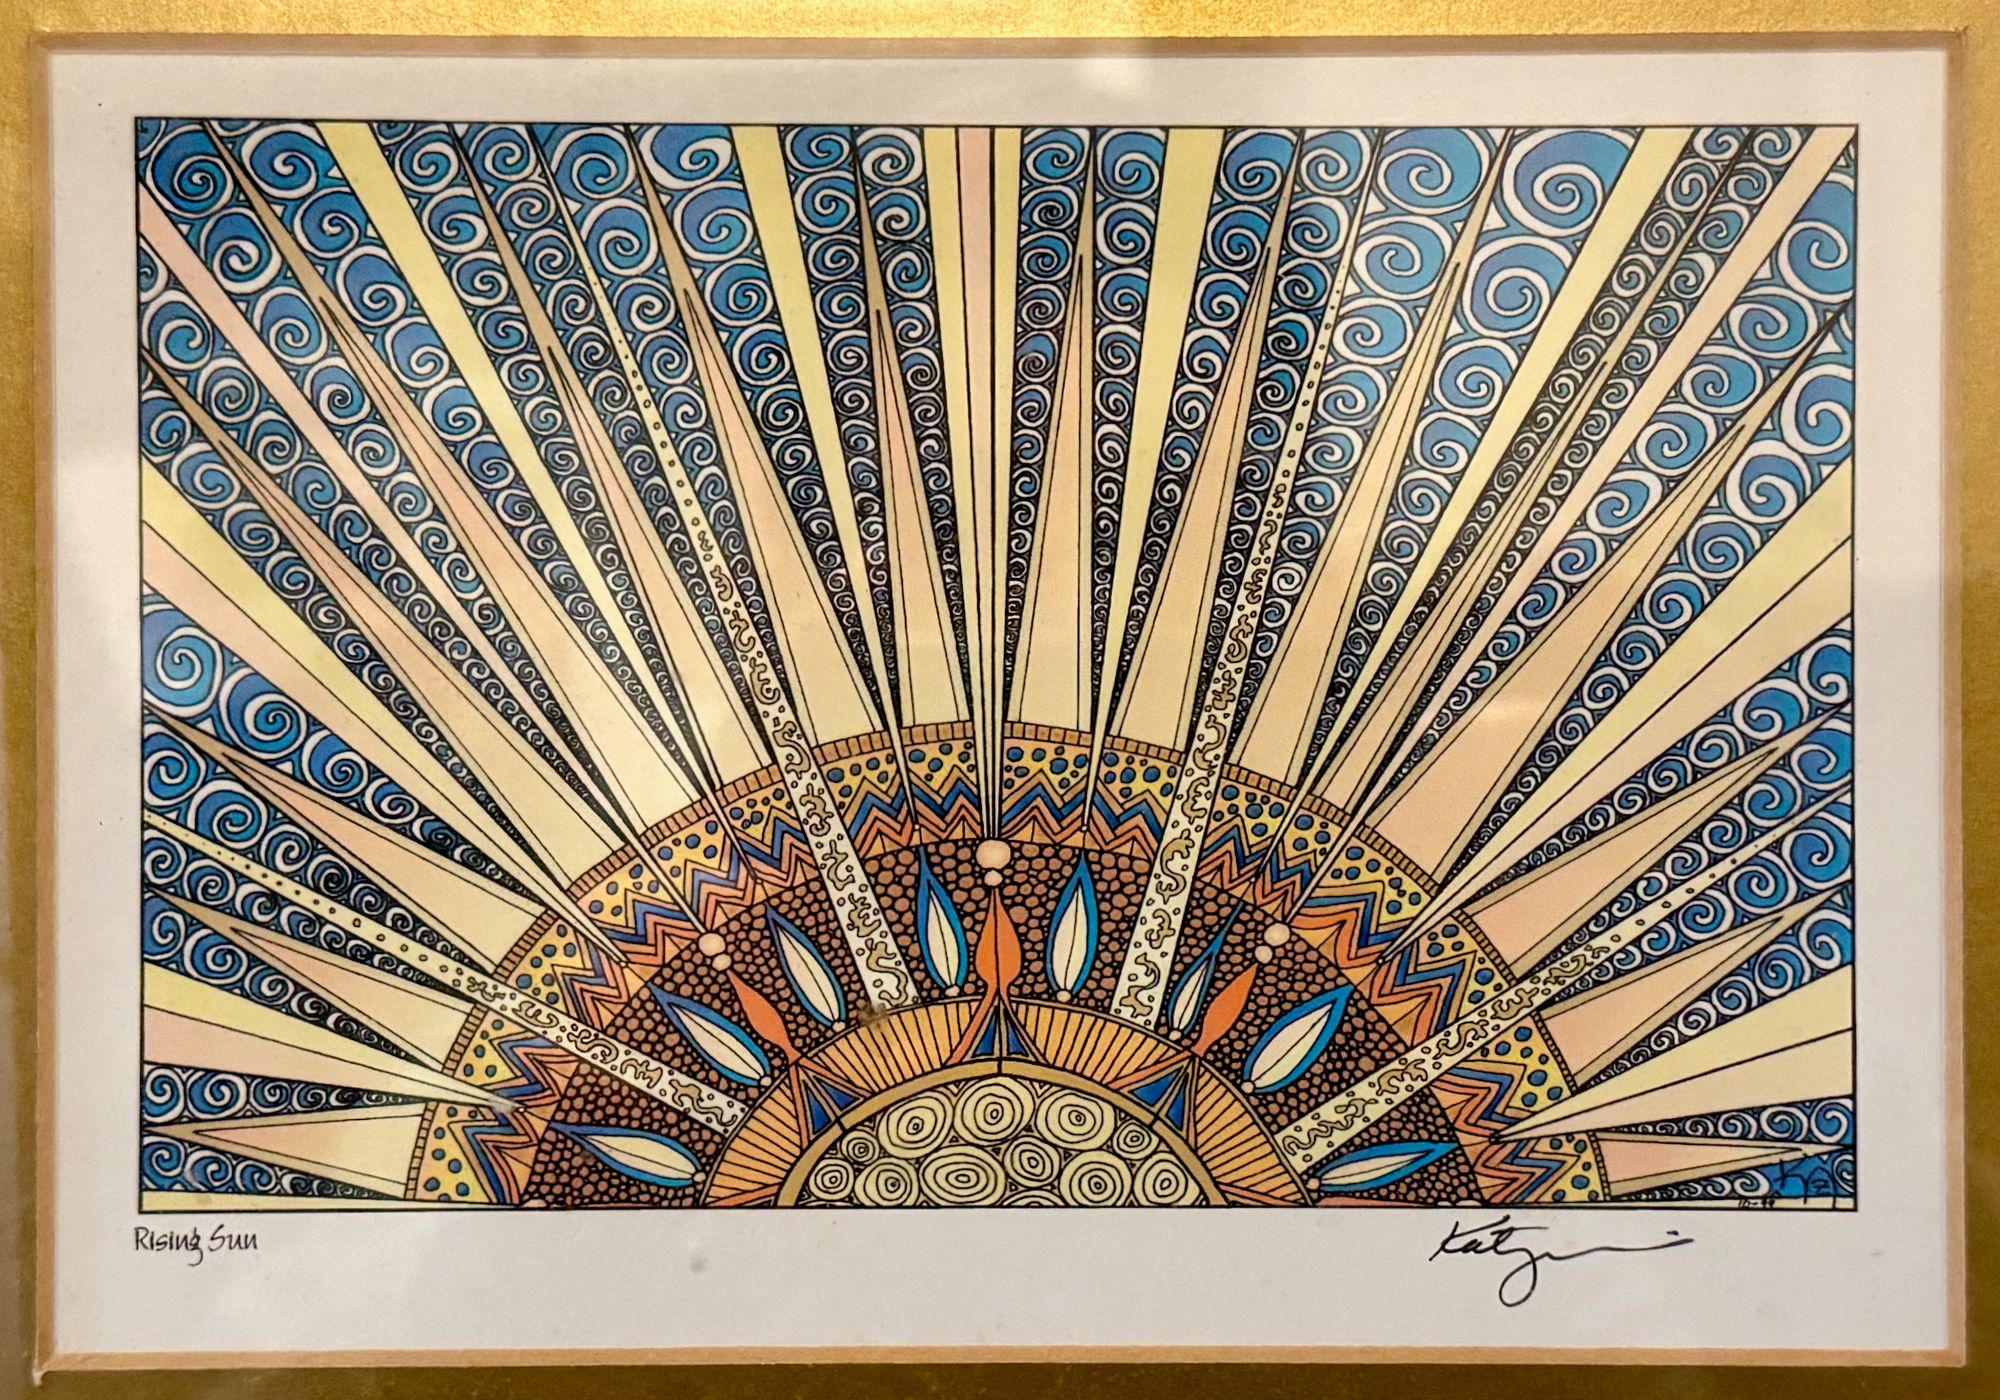 detailed pen and ink illustration of a sun rising in golds, blues and oranges outlined in black ink. rays extend from a central half-circle full of intricate patterns of circles, triangles, spirals, leaf-shapes and zig-zags. 